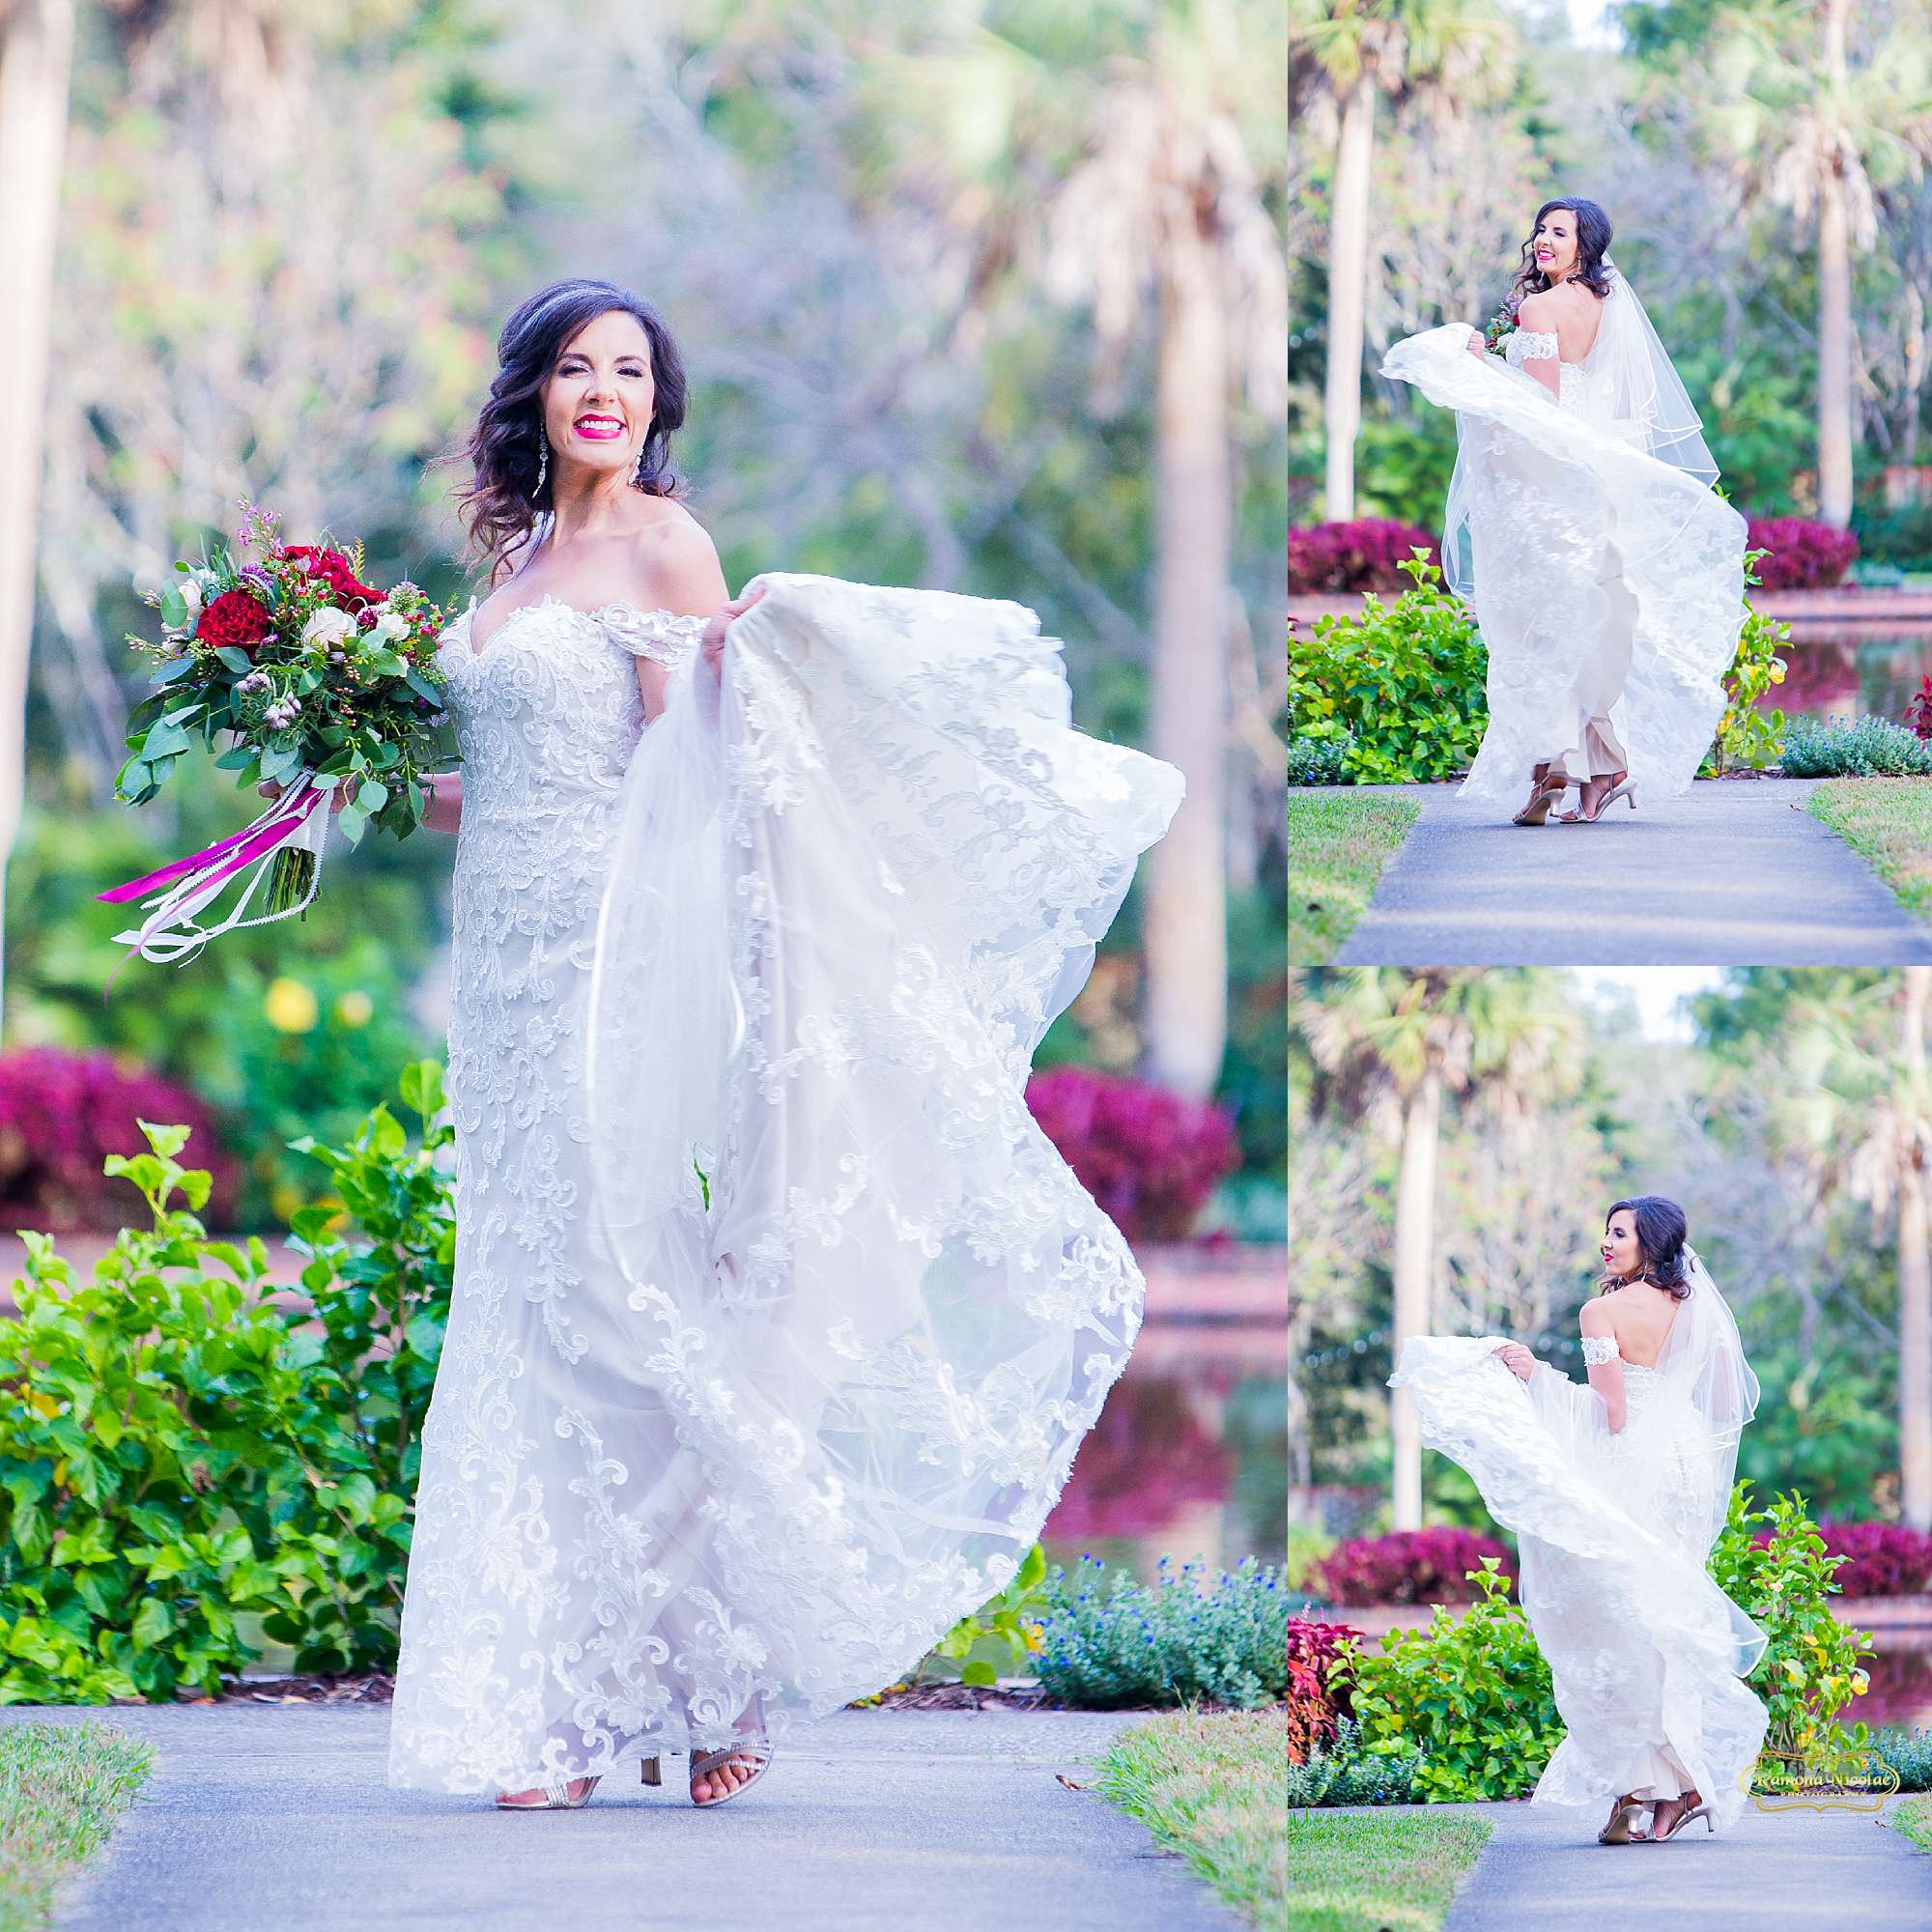 bride smiling and twirling spinning with red flowers and veil at brookgreen gardens during bridal session with ramona nicolae photography myrtle beach wedding photographer-5.jpg